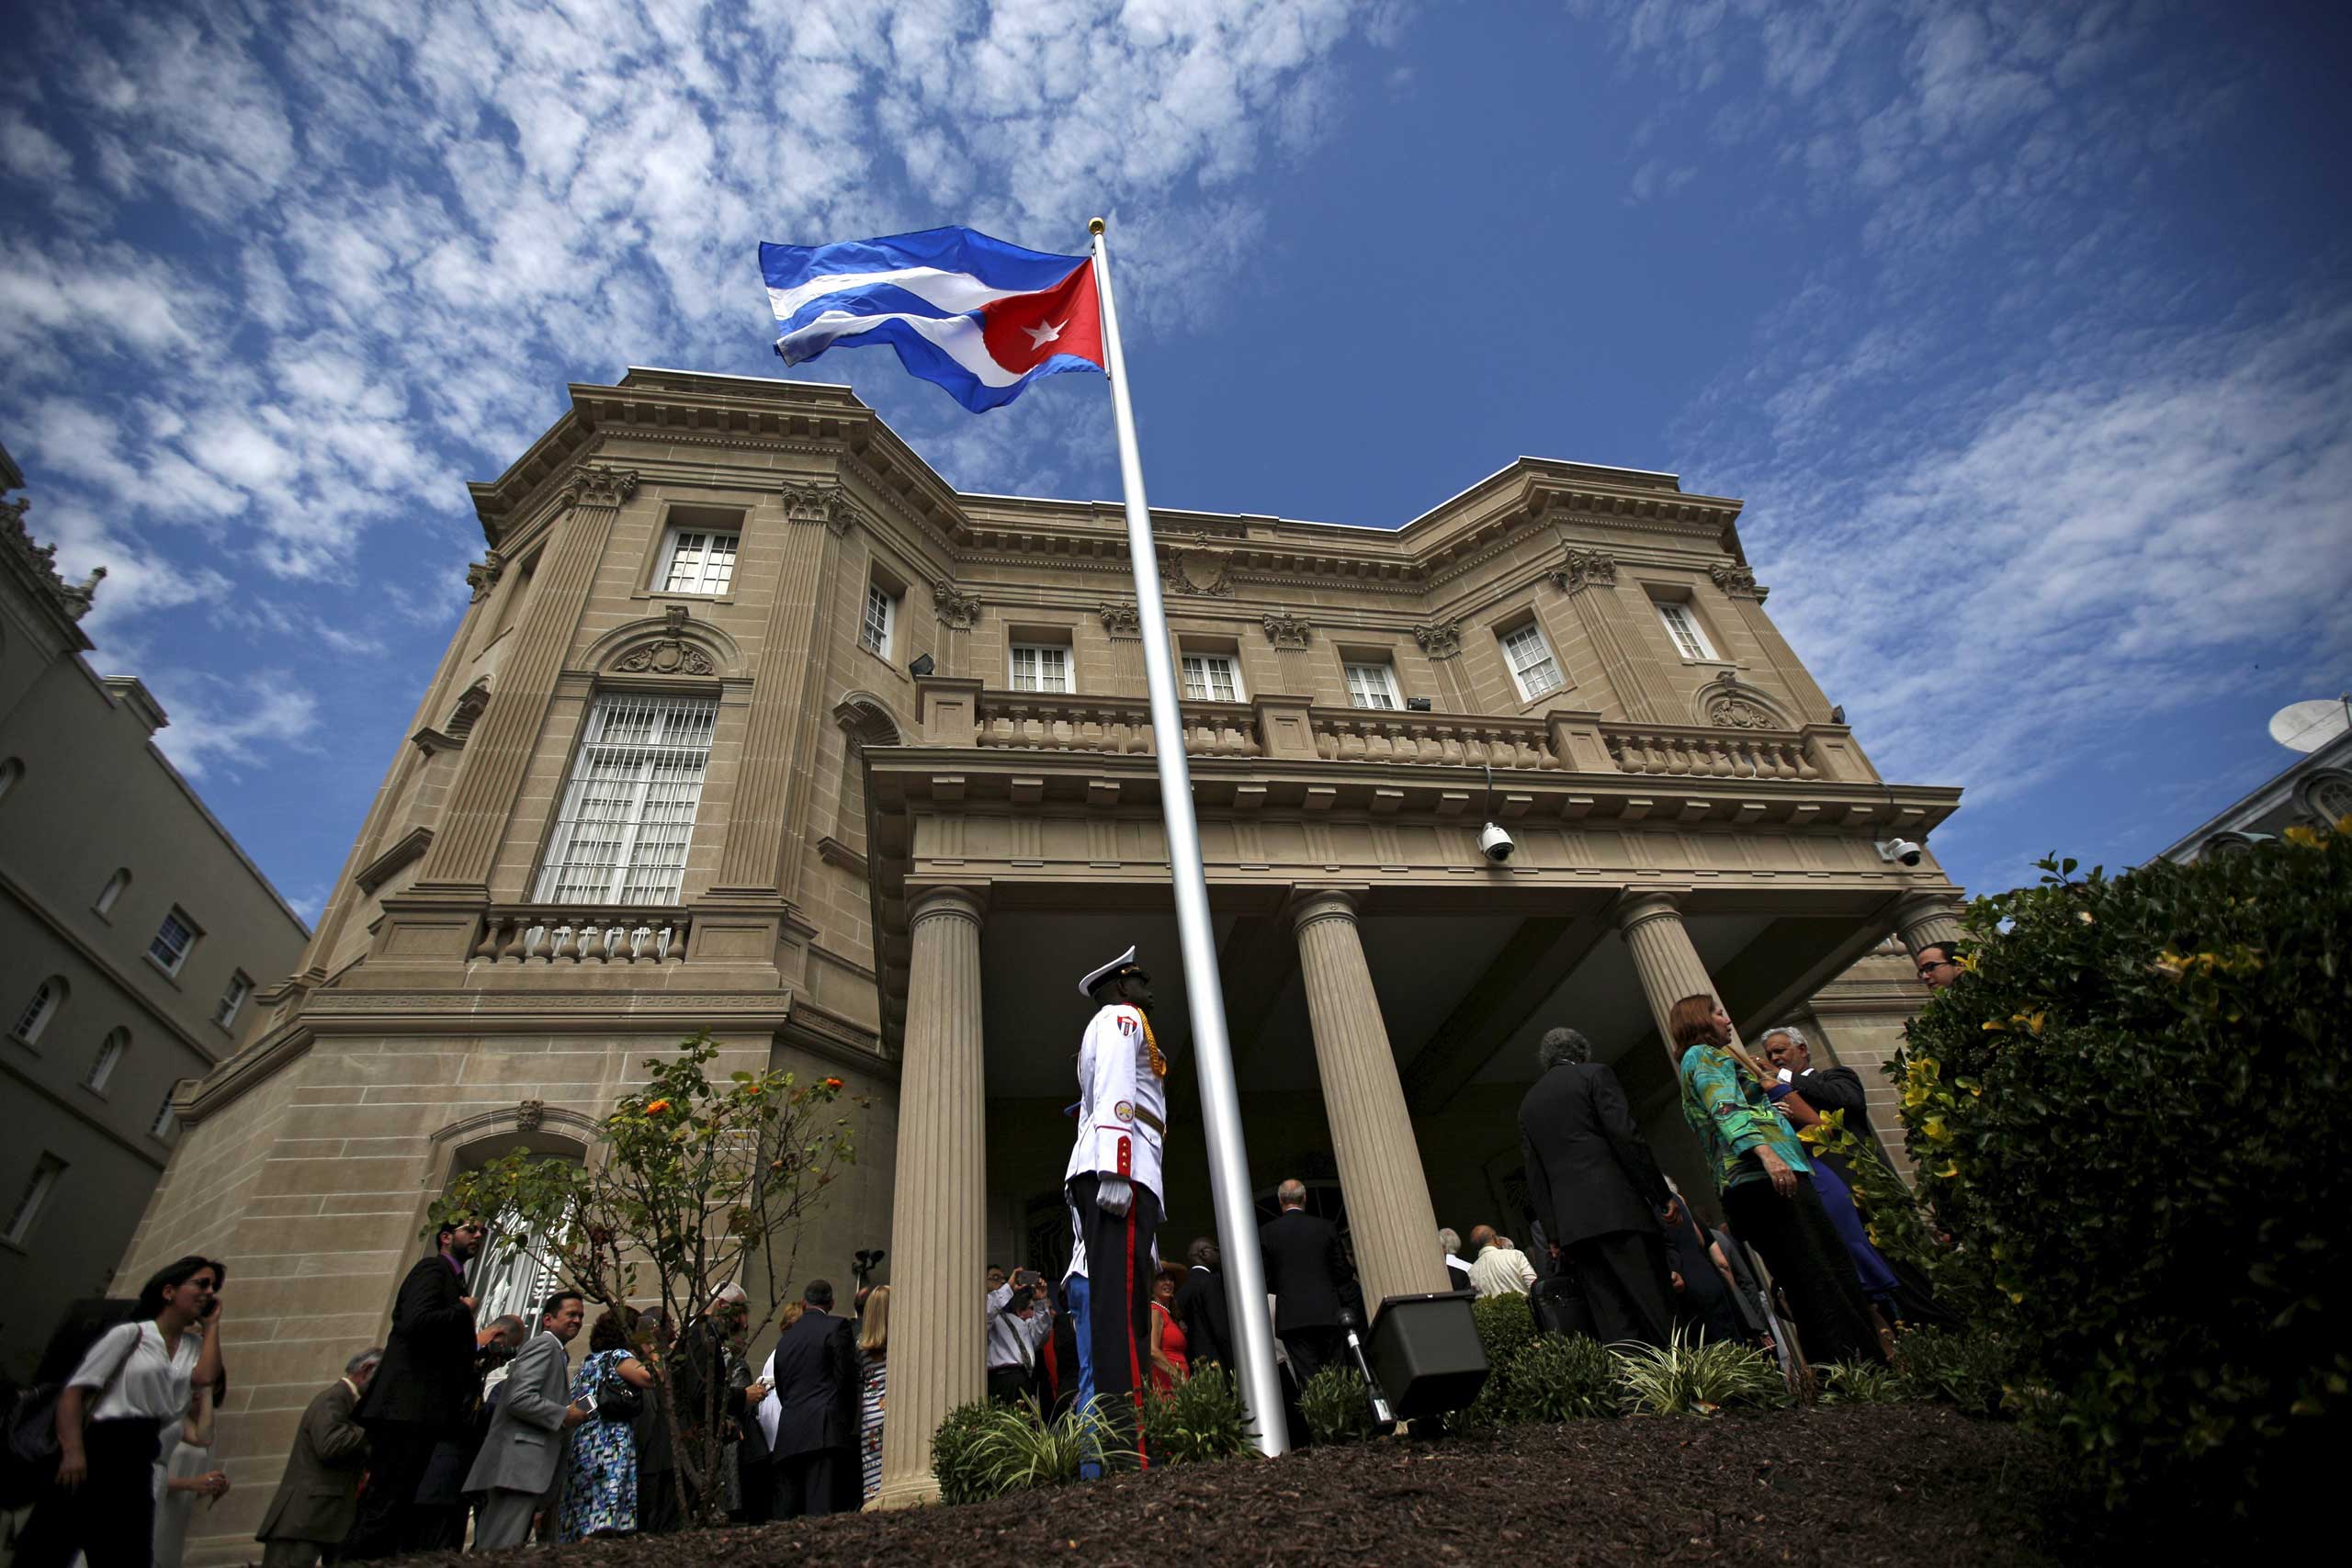 A guard stands in front of the new Cuban embassy after officials raised the national flag in a ceremony in Washington on July 20, 2015.